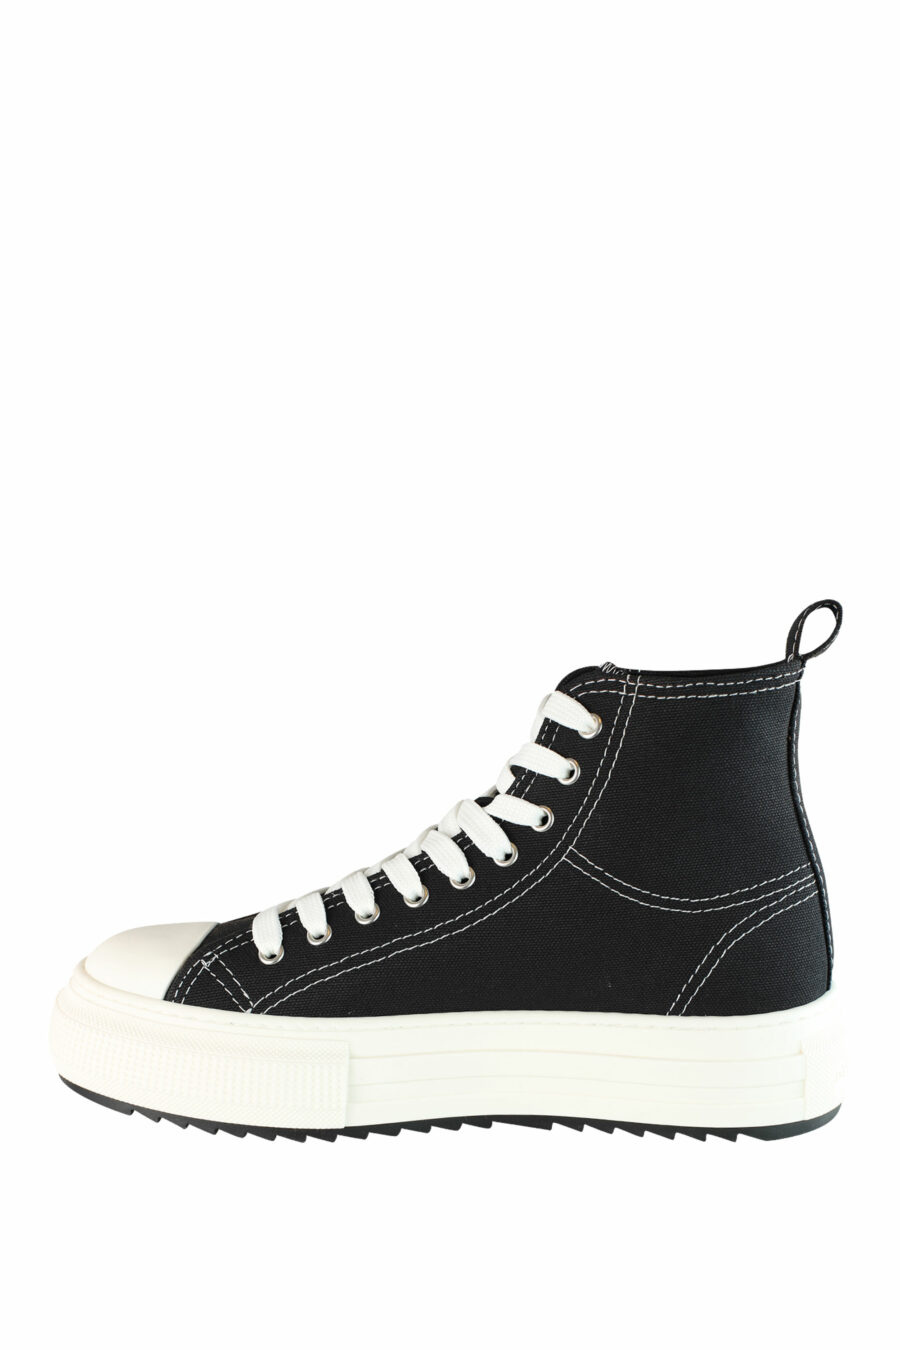 Black bootie style trainers with platform and mini logo - IMG 1422